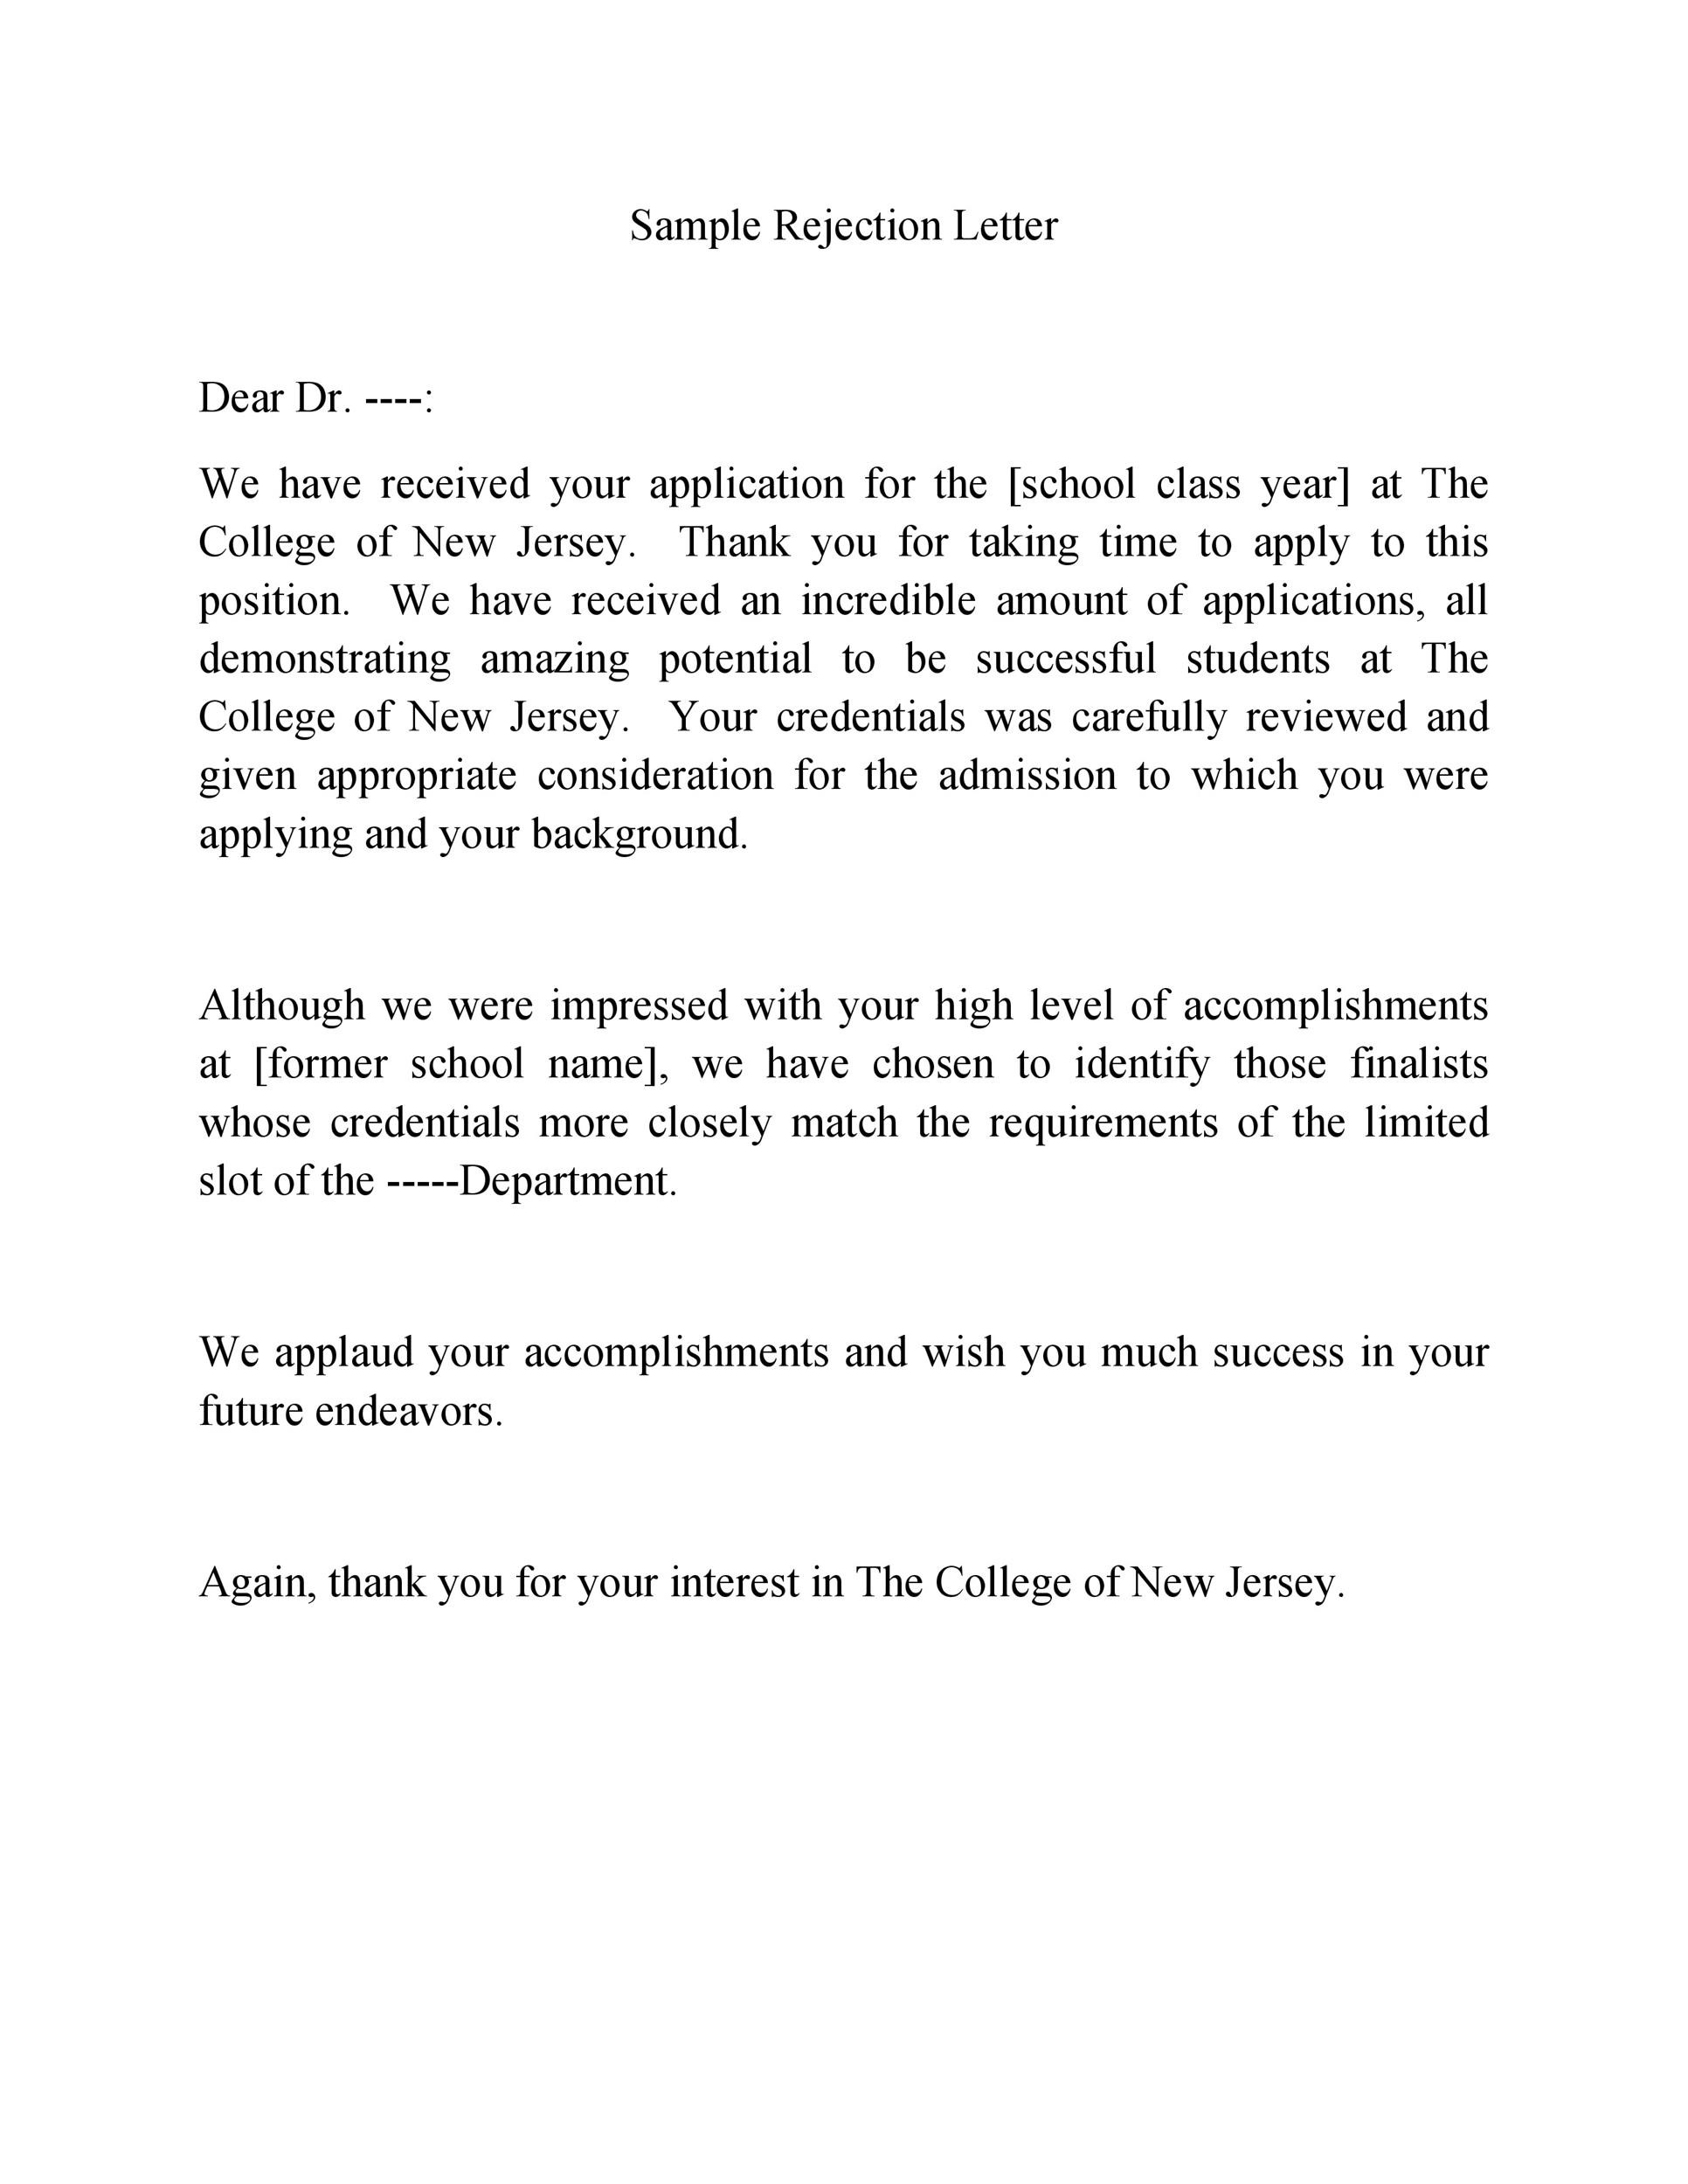 College Rejection Letter Sample from templatelab.com